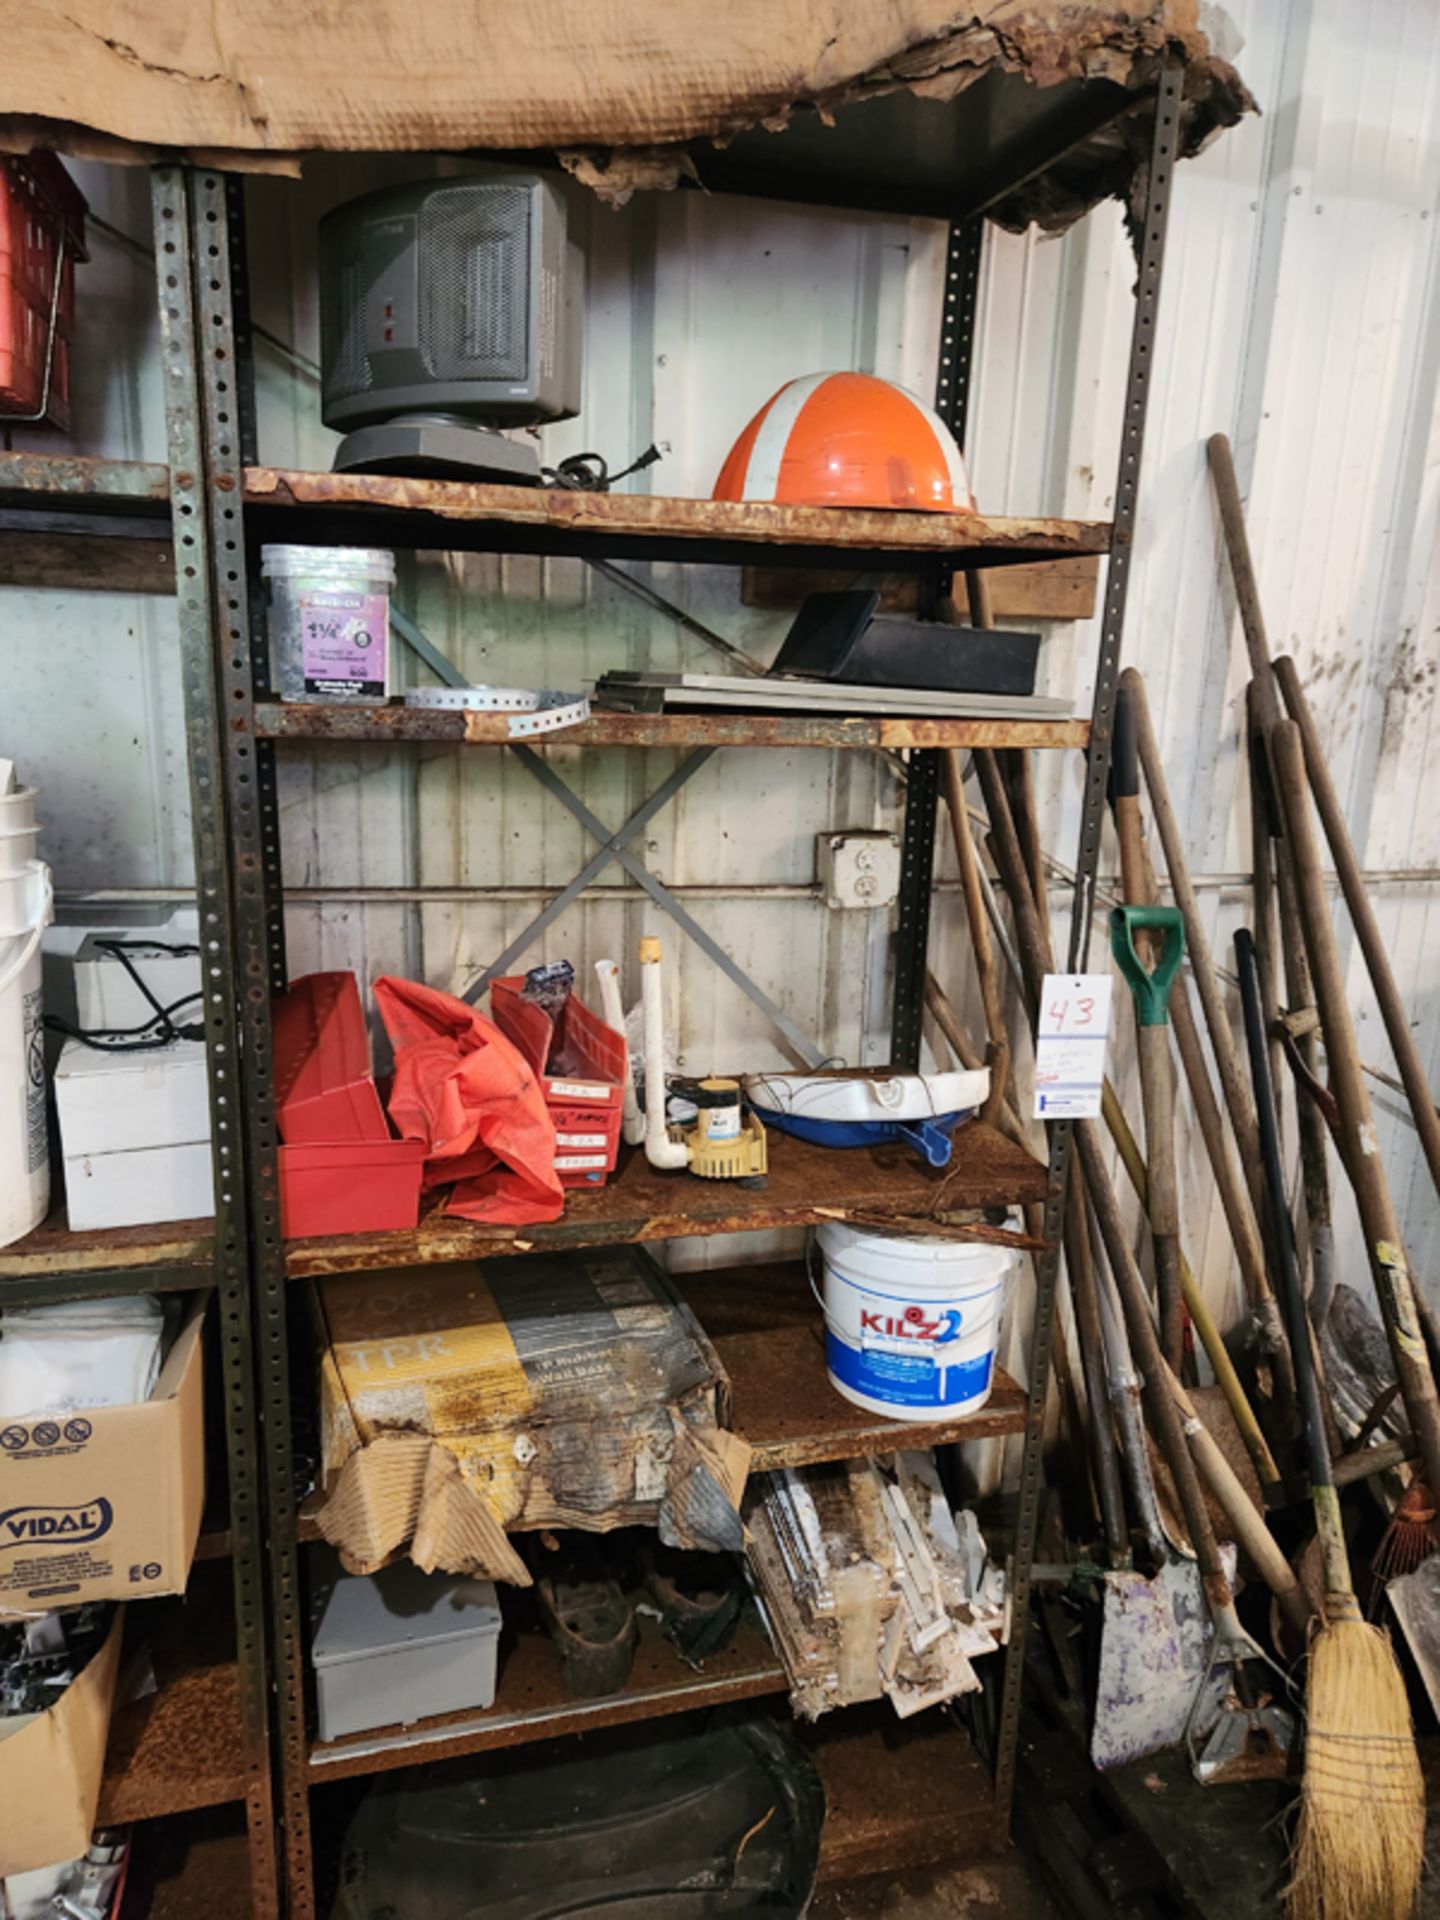 LOT OF MISC - ON SHELVES, YARD TOOLS, METEL SHELVING, CHAIR, BULBS, WOODEN CRATE, ETC - Image 2 of 11